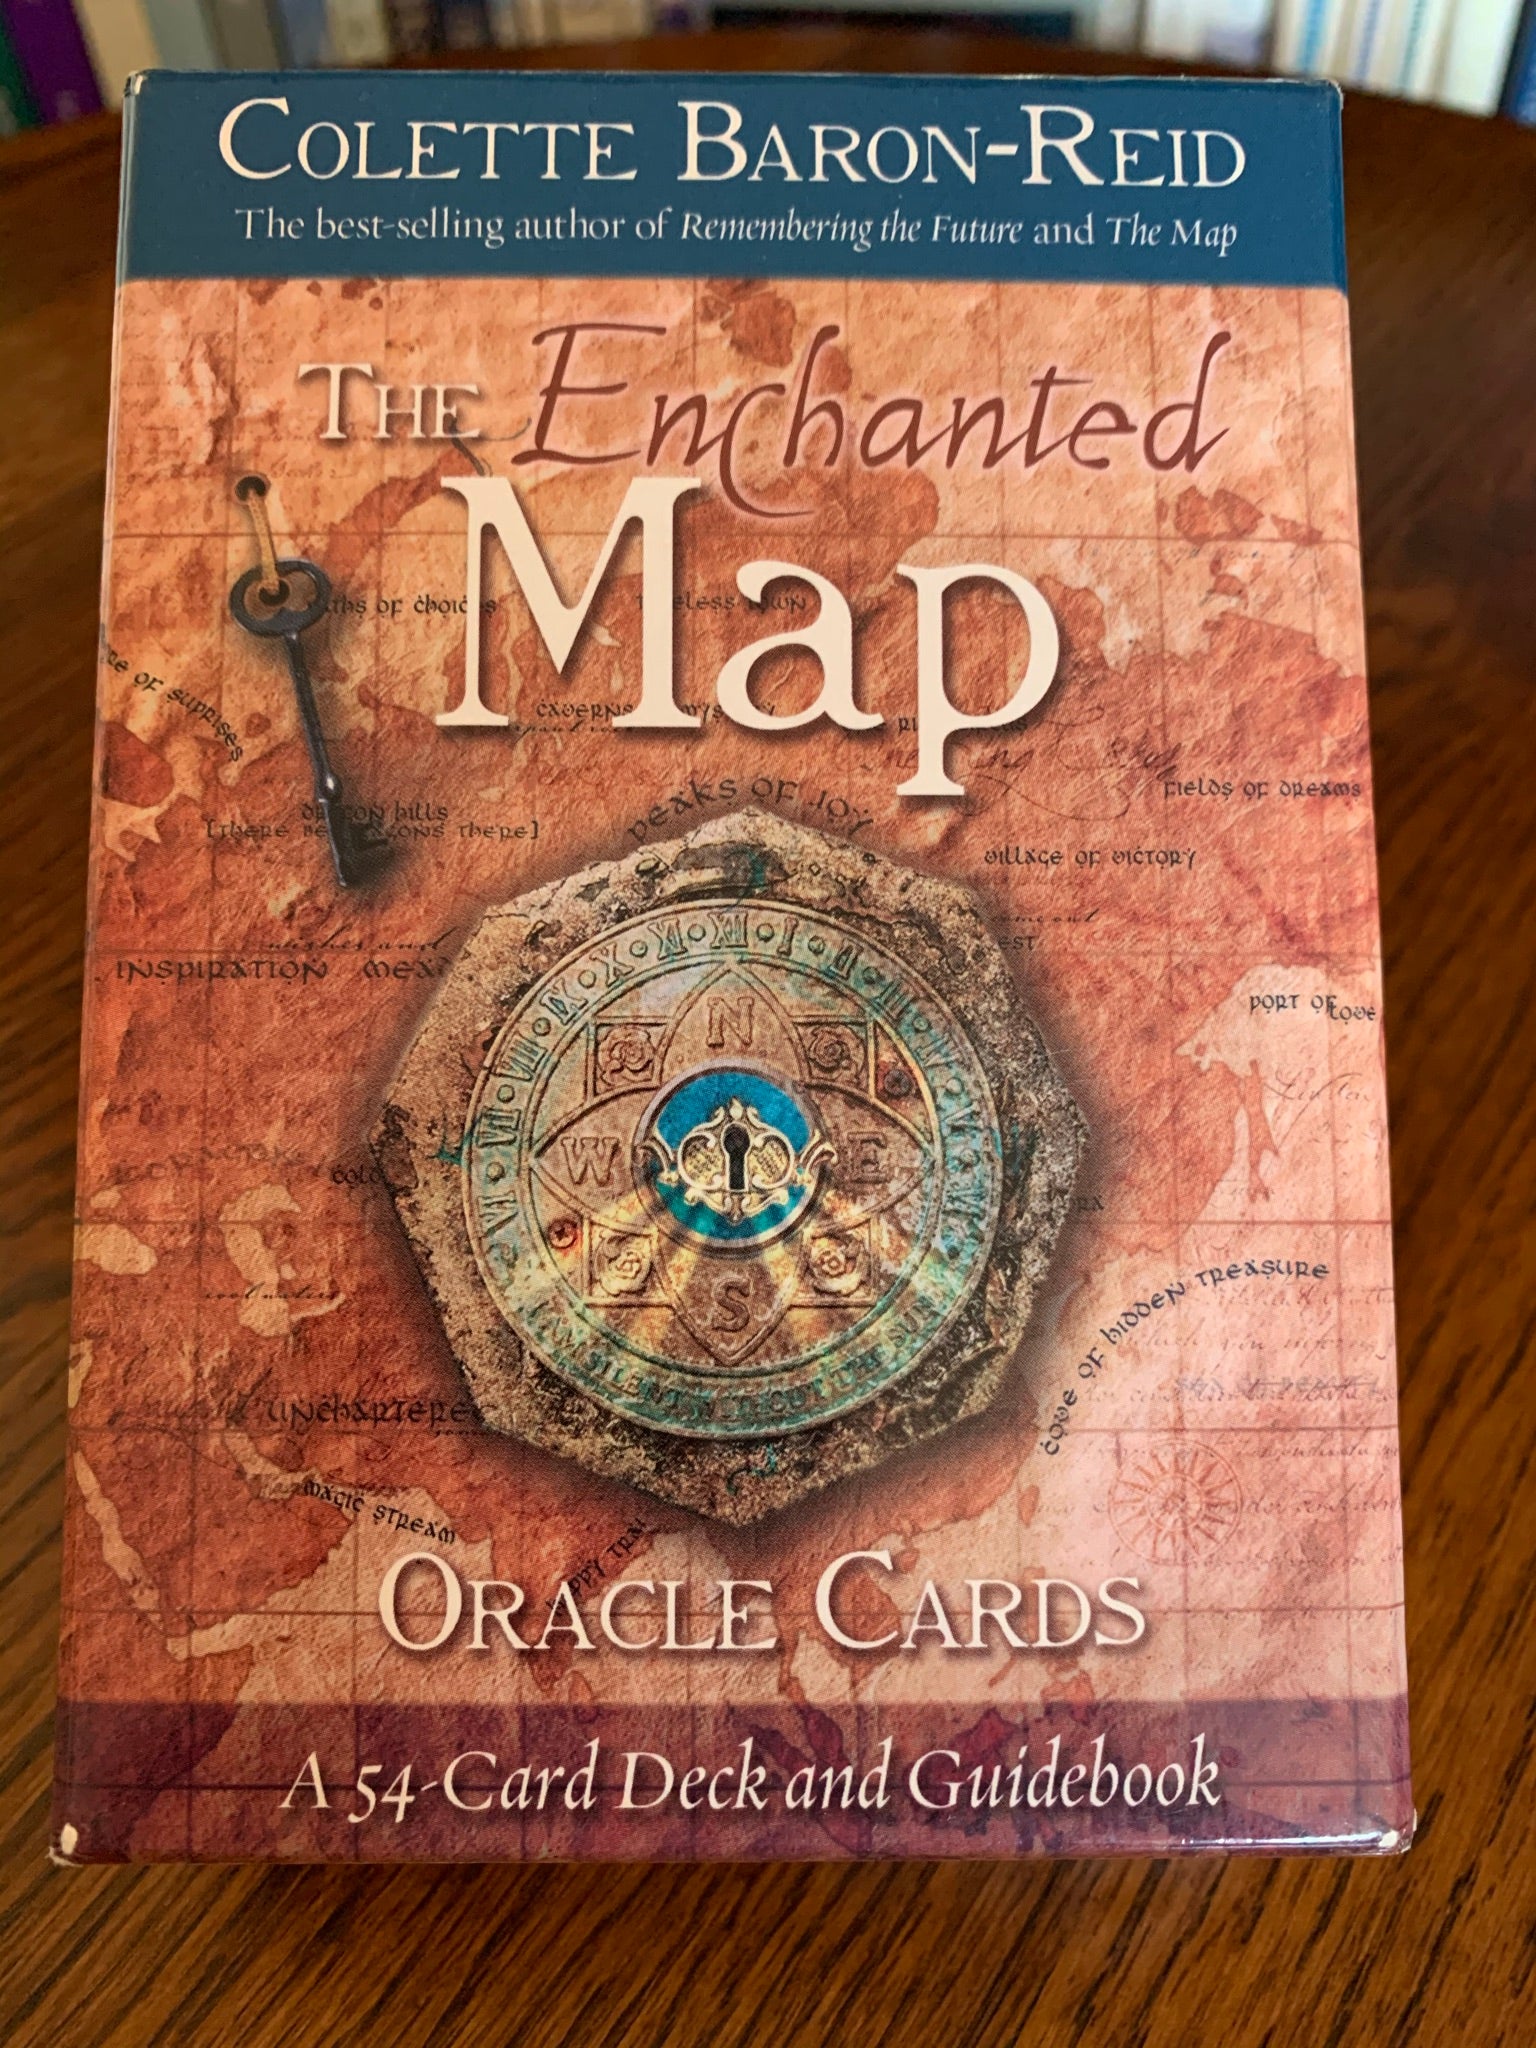  Photo of box front. The Enchanted Map Oracle Cards by Colette Baron Reid, includes 54 cards, a guidebook and an box for storing them. An enchanting deck with lovely artwork. Another one of my favorite decks, it gives you the tough answers (e.g. "rock bottom" & "Ghostlands") which are necessary for self-growth and understanding, as well as uplifting messages (e.g. "Coming to Life" & "Peaks of Joy."). Colette Baron-Reid is a psychic medium, intuitive counselor and best-selling author. Price is $21.99.